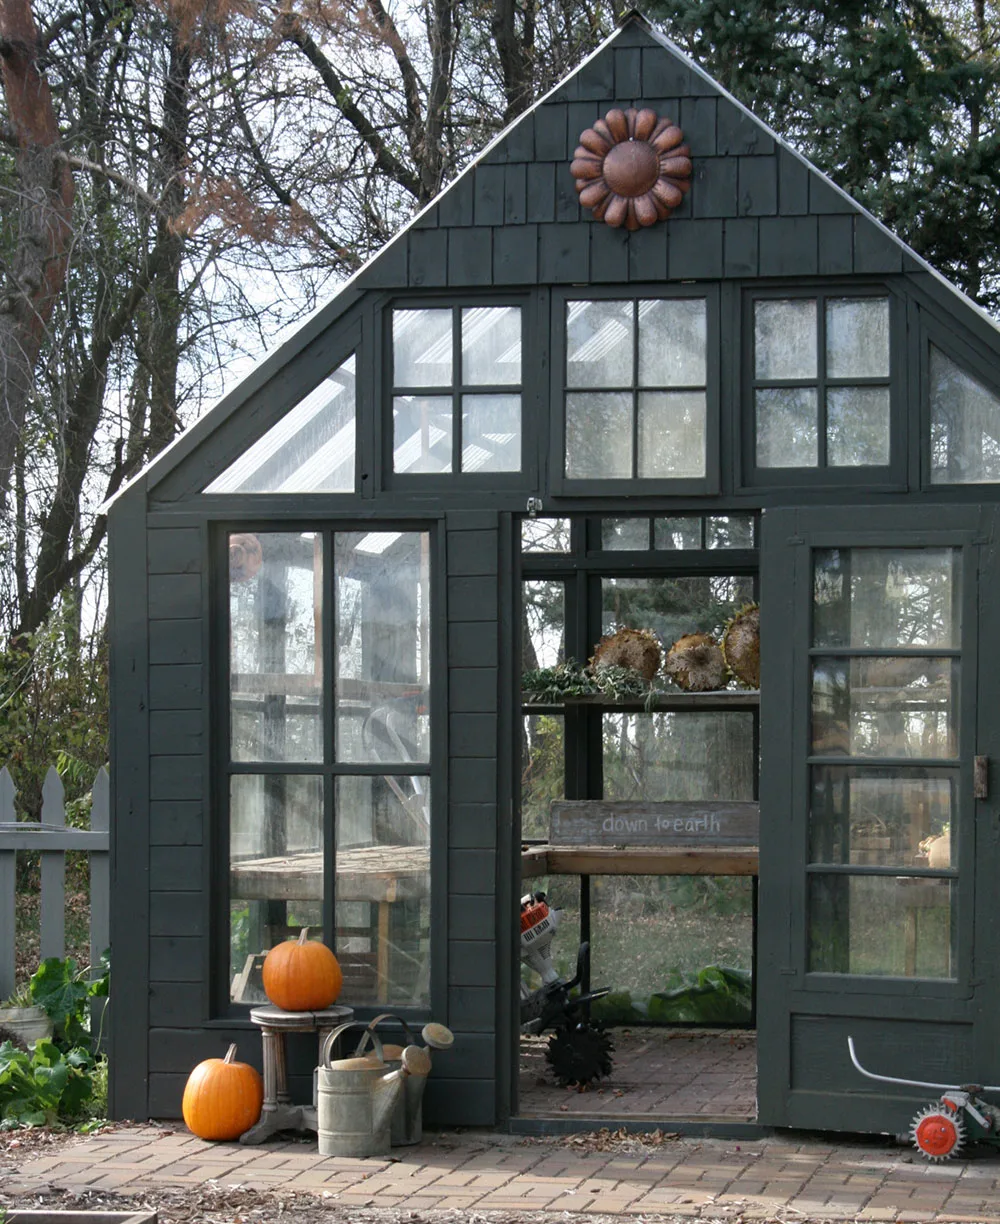 Greenhouse made with recycled materials